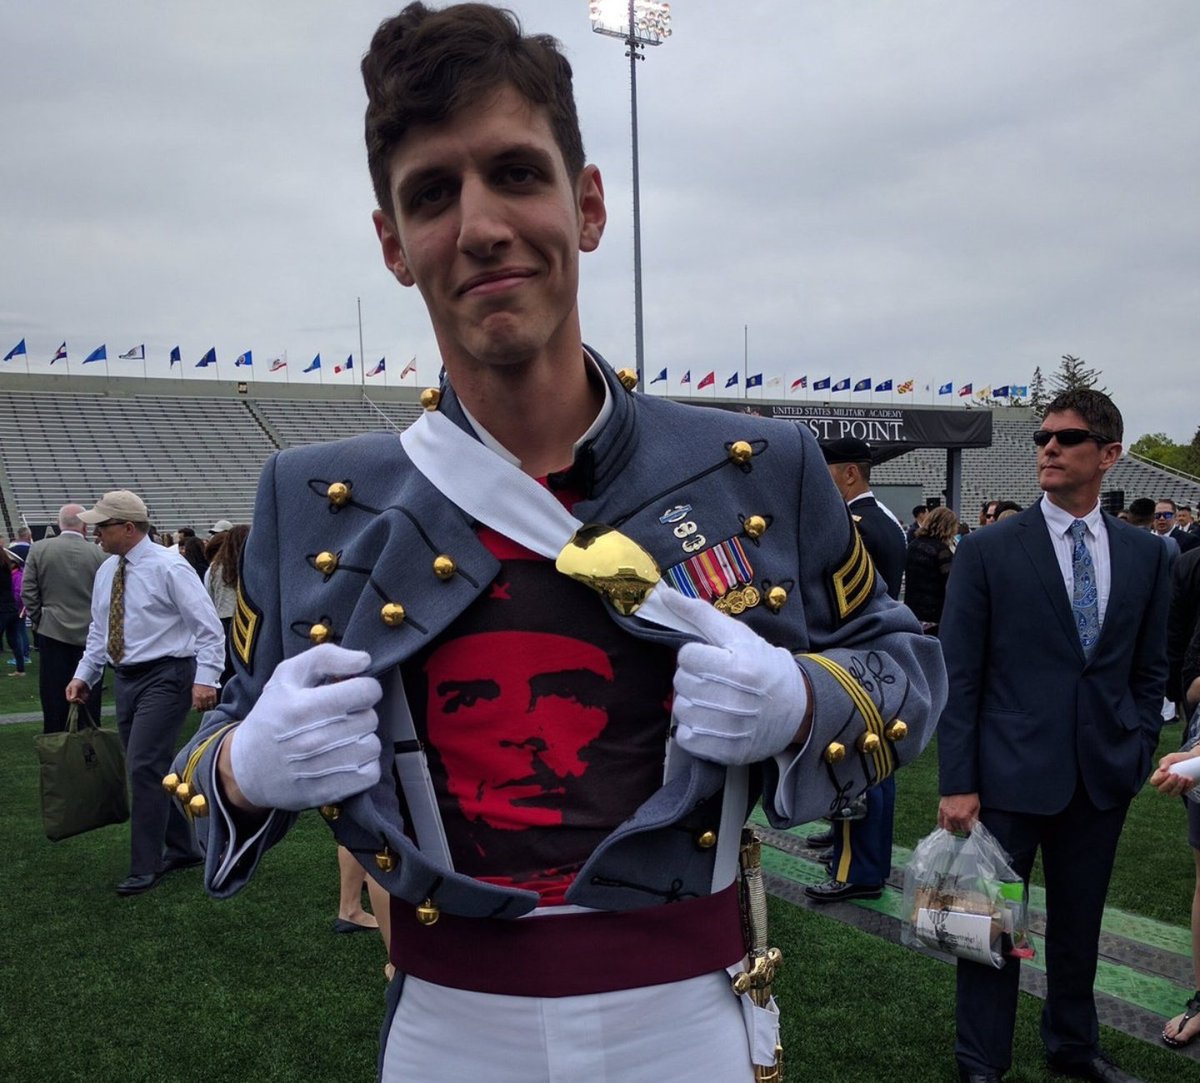 Navy with the savage burn against the West Point graduate who advocated for communism in uniform.  #ArmyNavyGame